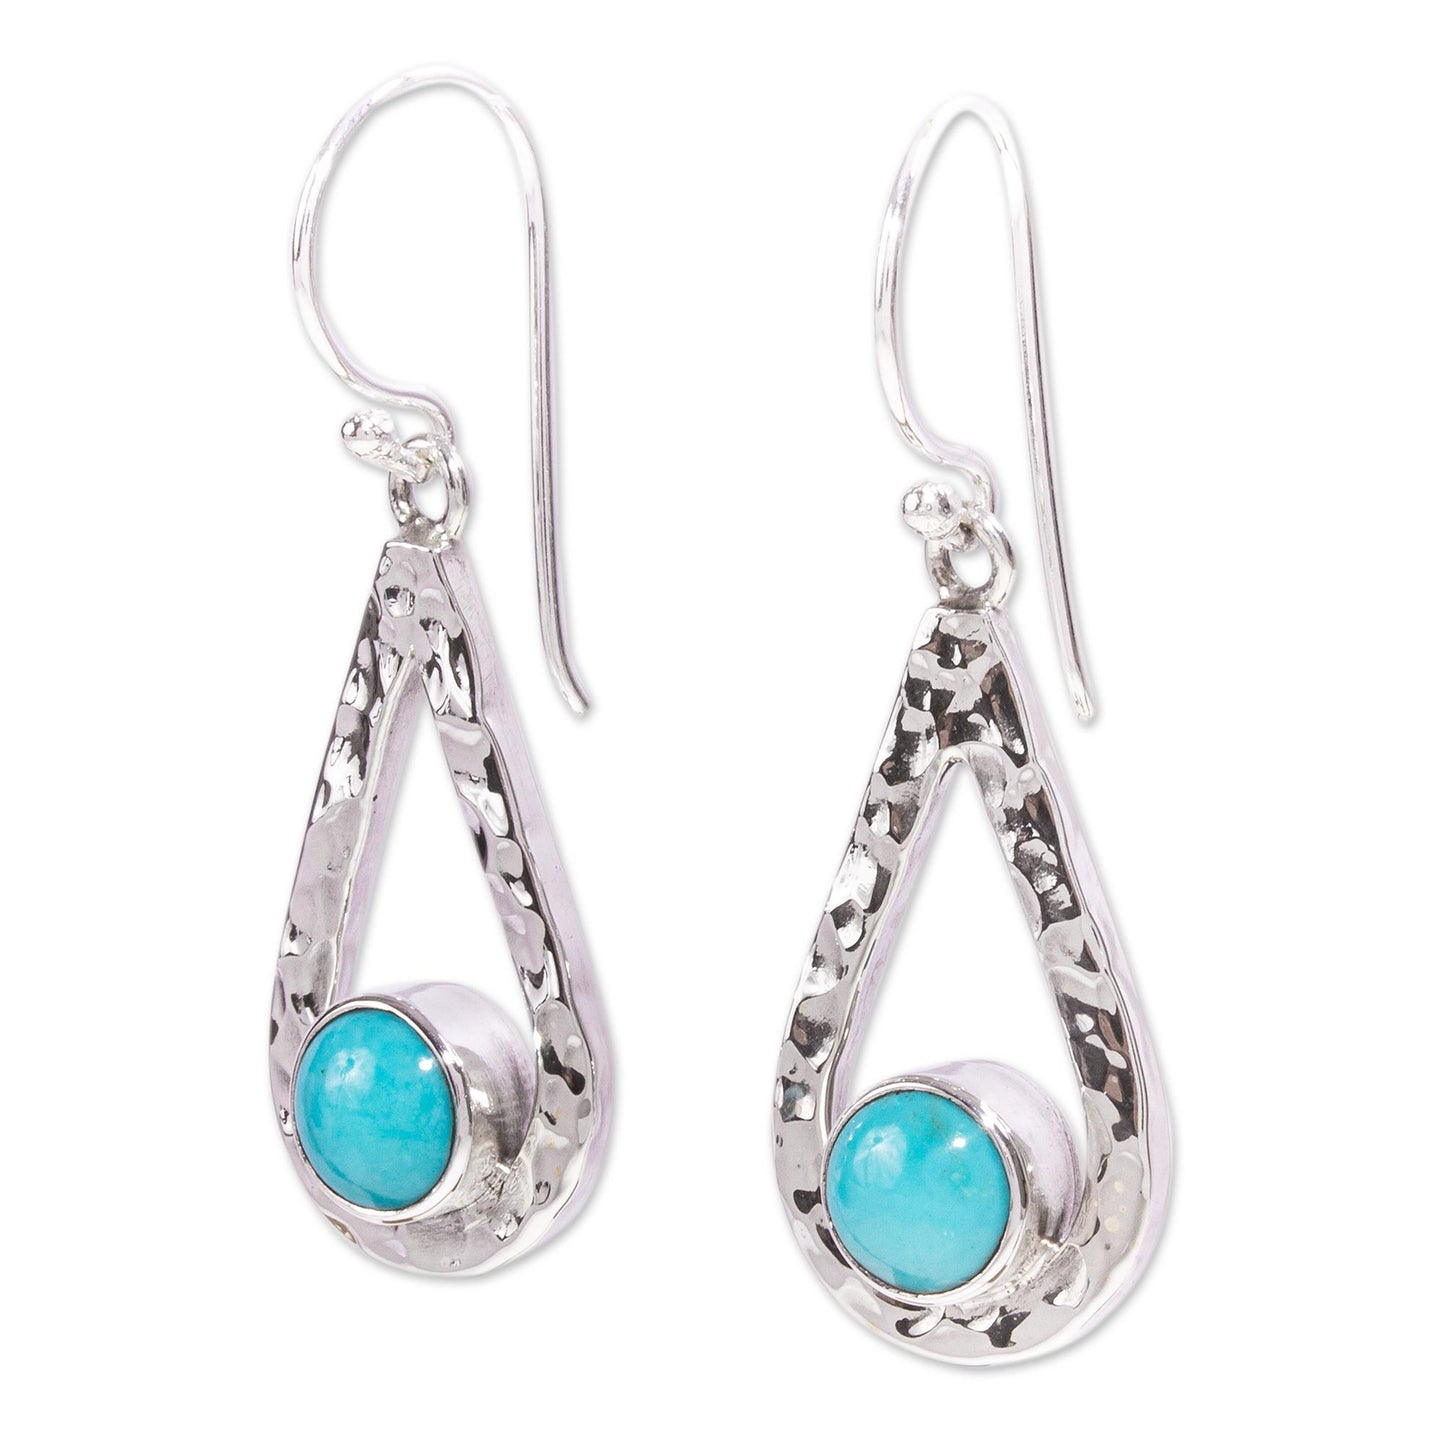 Luminous Rain Handcrafted Textured Taxco Silver Natural Turquoise Earrings